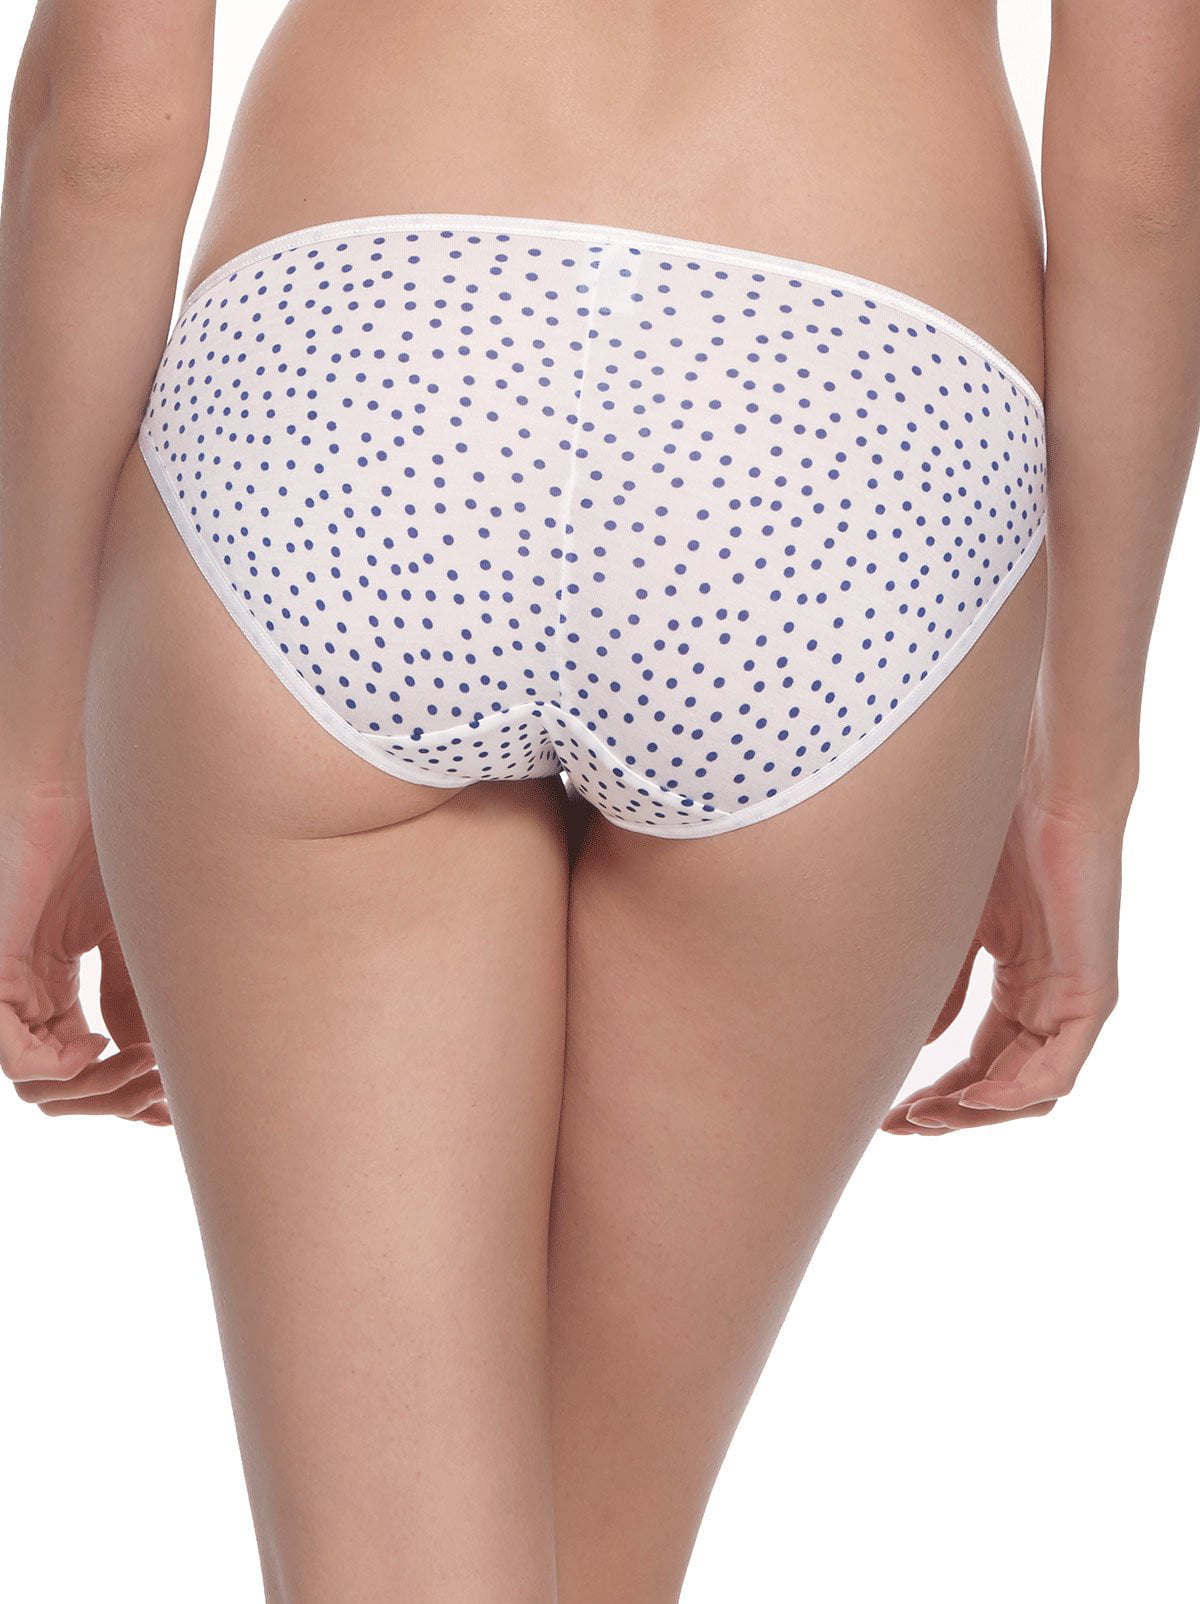 Women's black and white seamless bikini panties with an original pattern  Gatta Bikini Cotton Comfort Print 01 buy at best prices with international  delivery in the catalog of the online store of